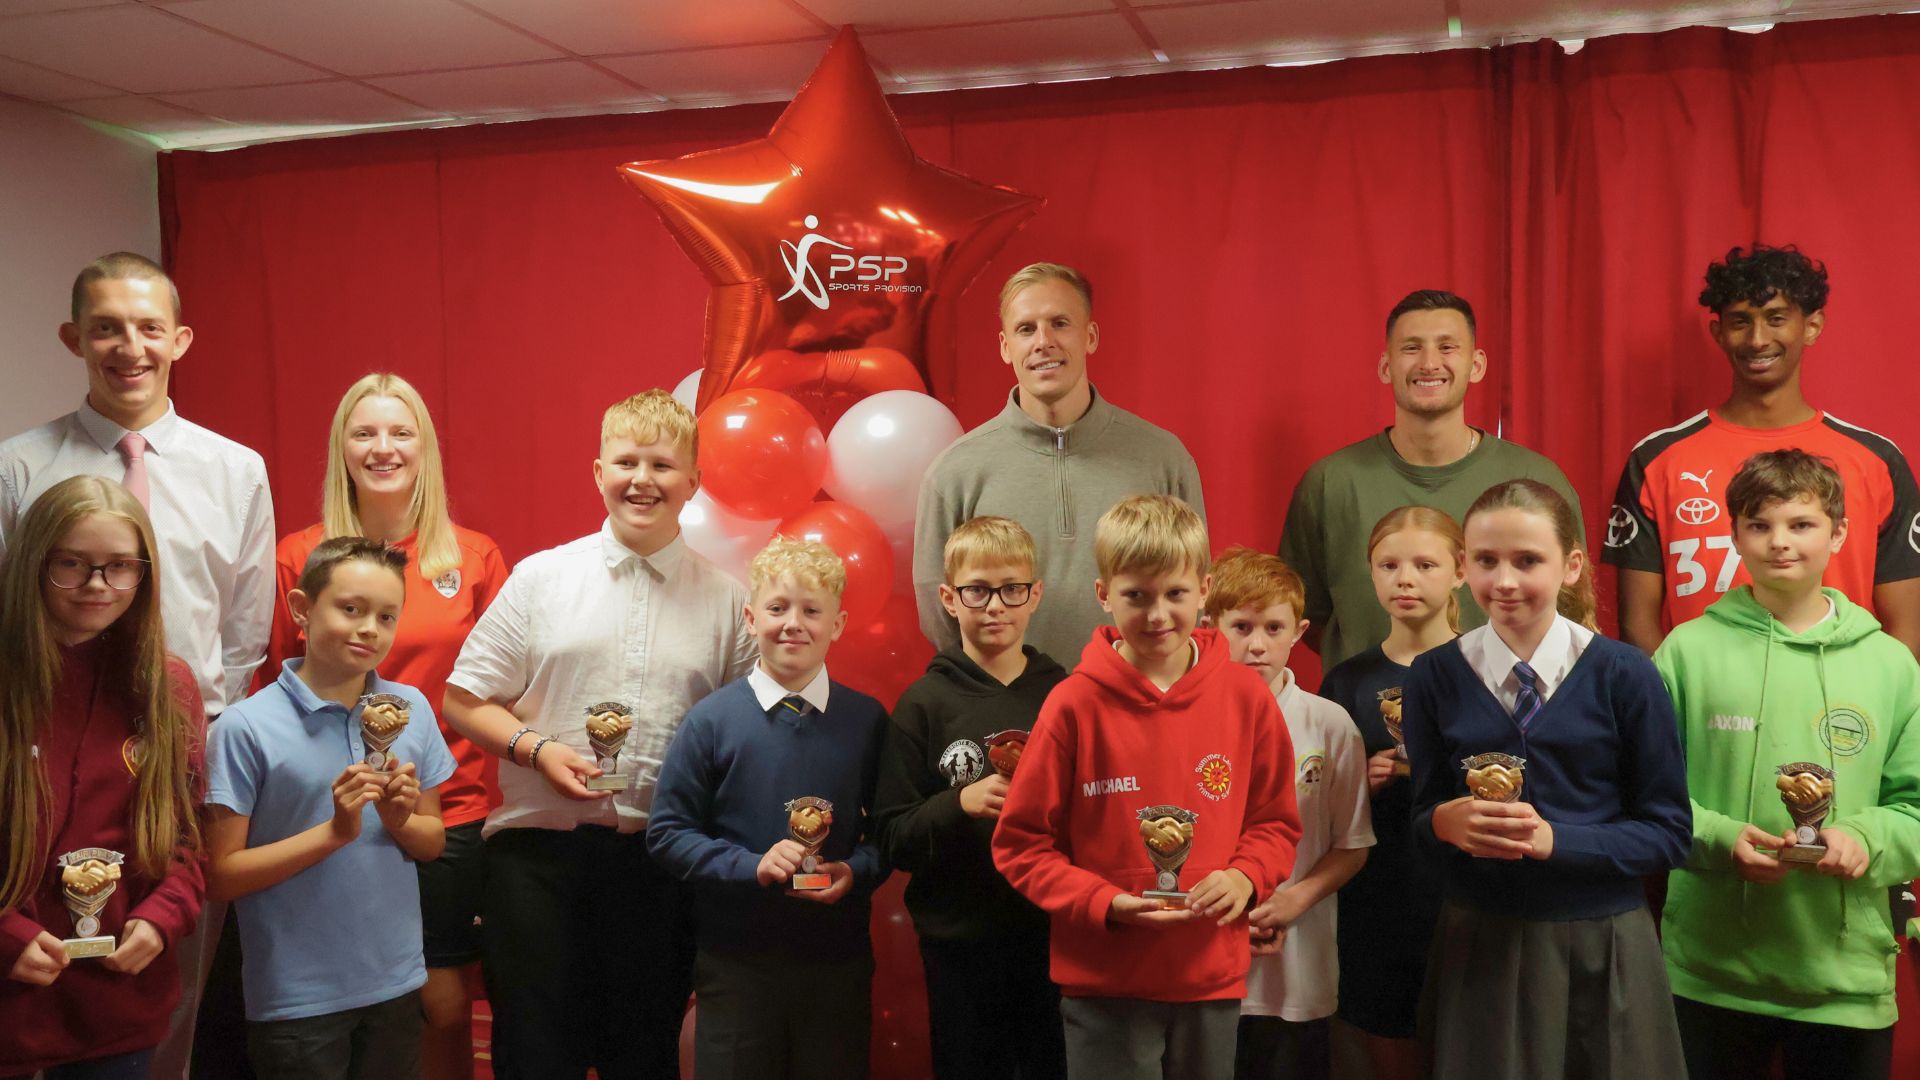 Barnsley FC players, Vimal Yoganathan, Marc Roberts, and Jackson Smith join celebration at the Pro-Active School Performance Sports Awards Ceremony.